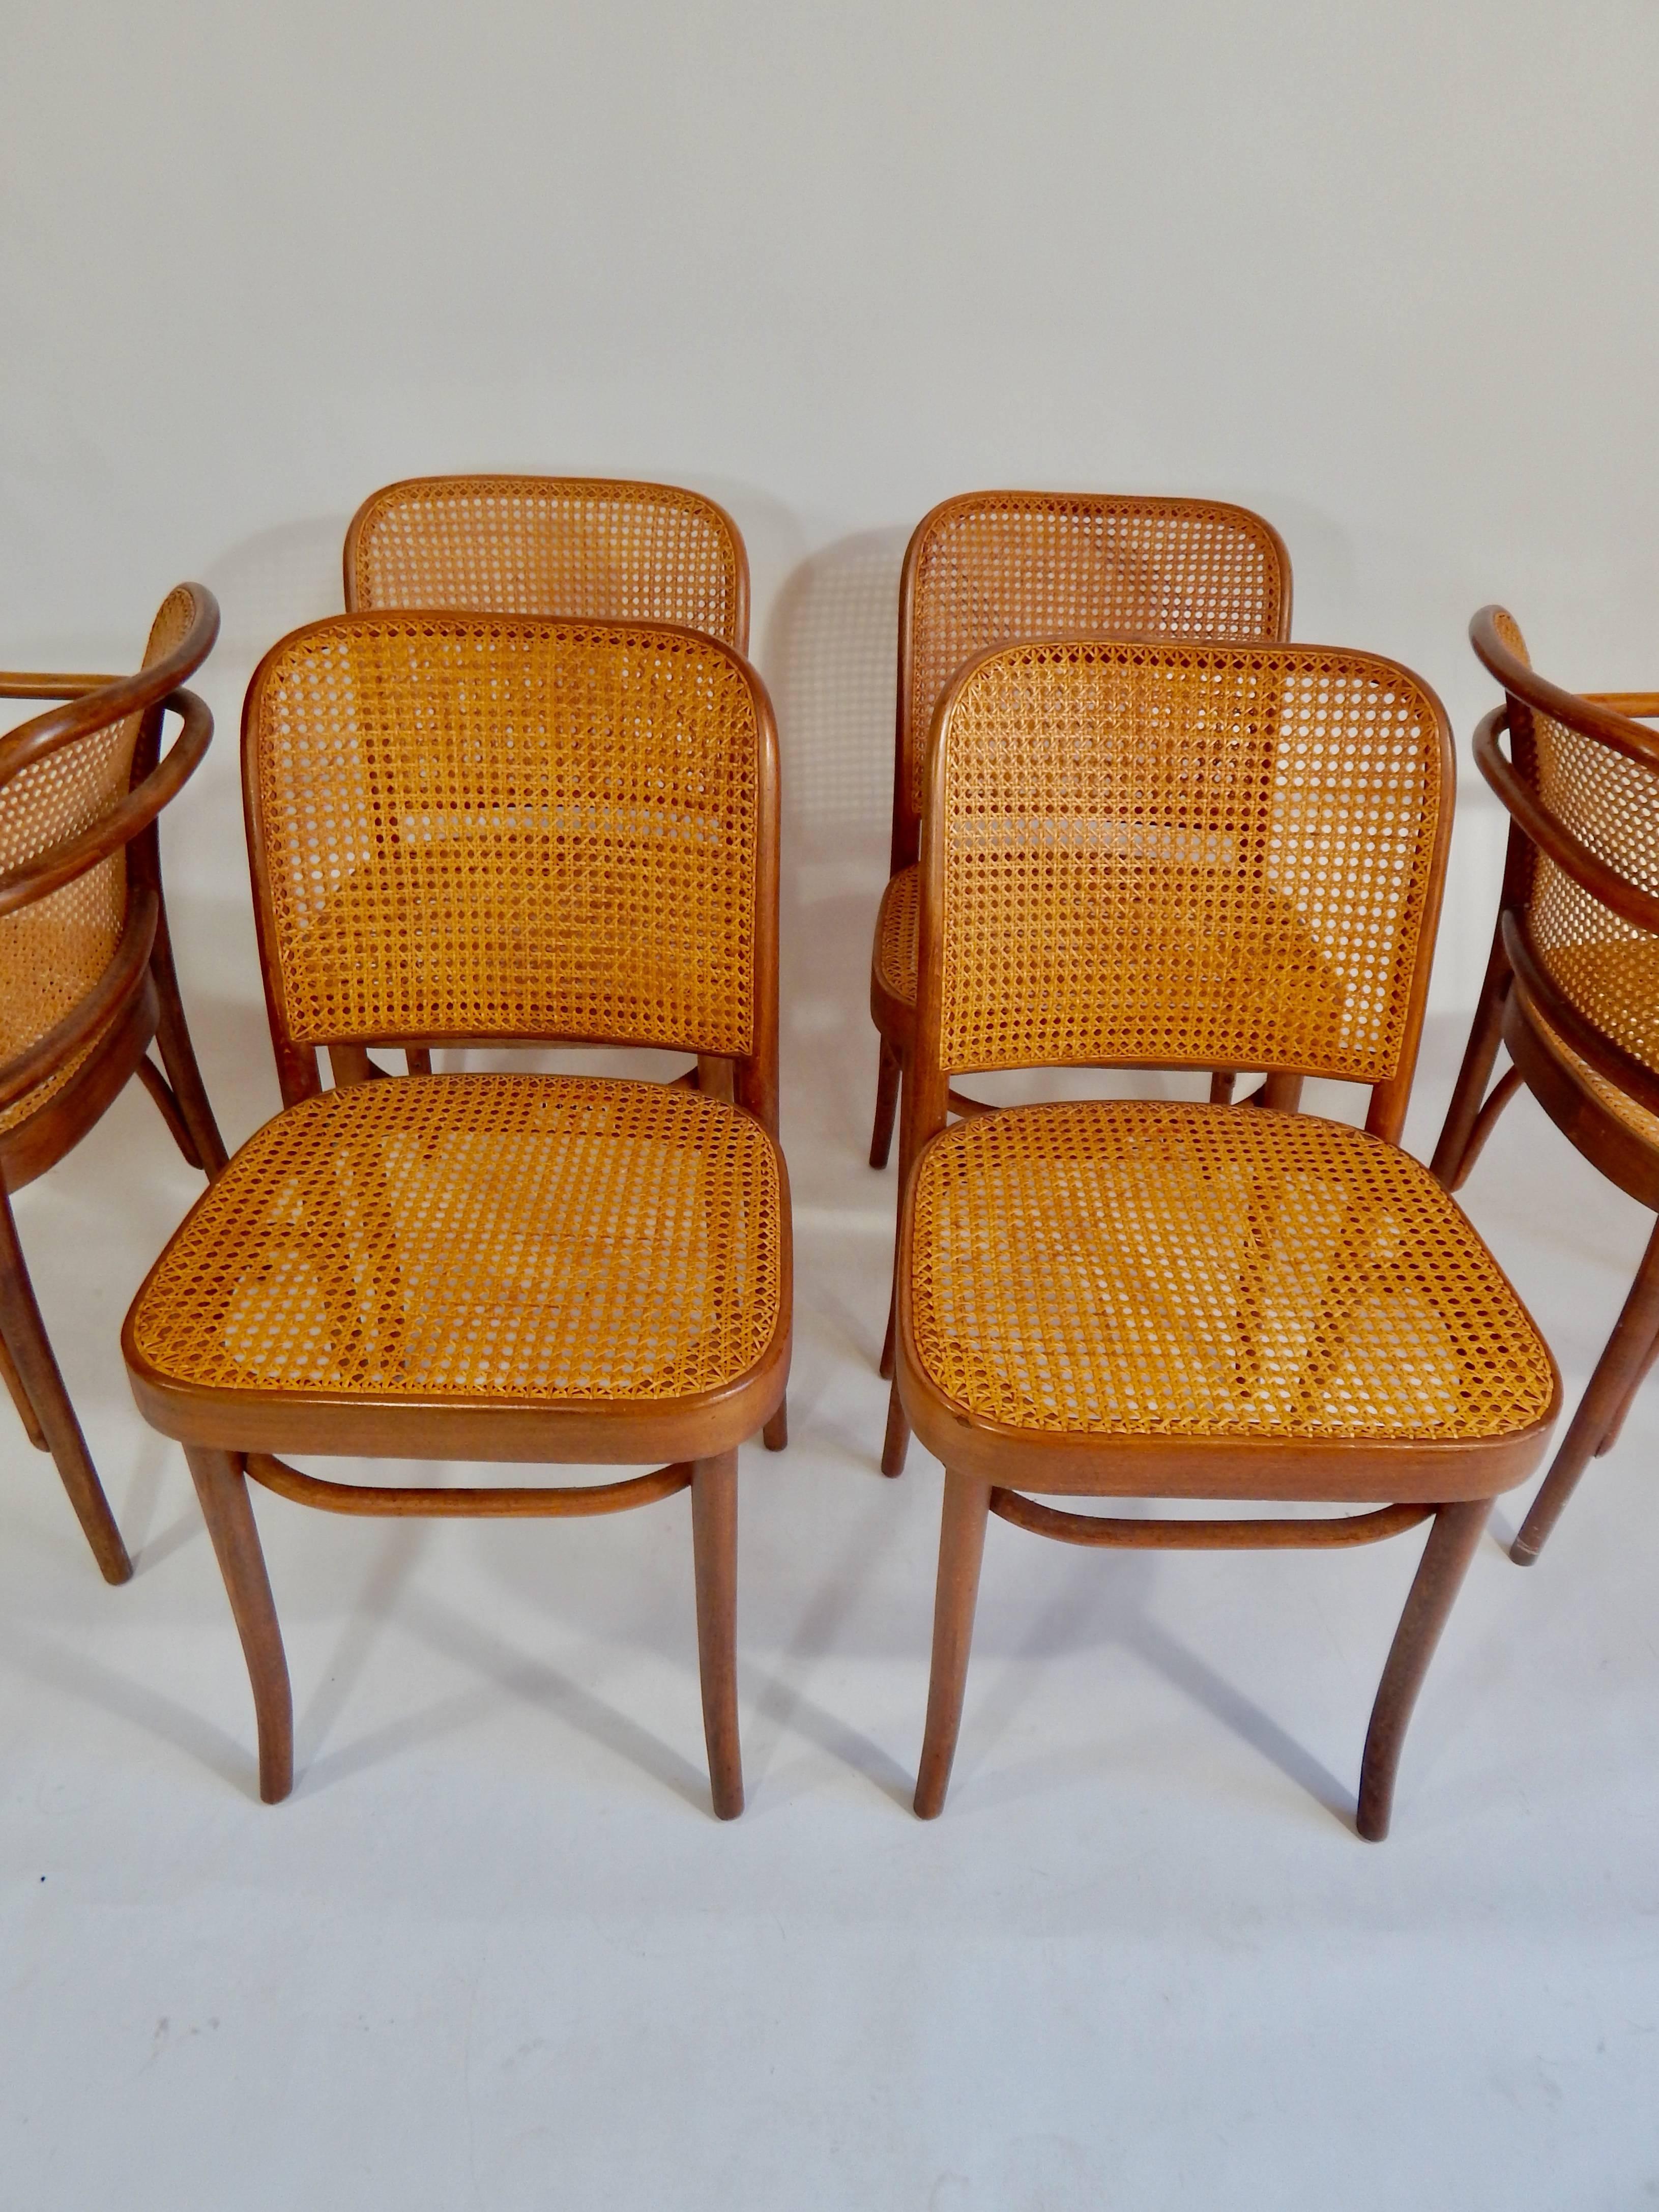 The original 1920s version of these Josef Hoffman for Thonet designed chairs. Four side chairs and two armchairs. All are marked Thonet and made in Poland. Bentwood and cane. All hand caning. Entire set is in exceptional original